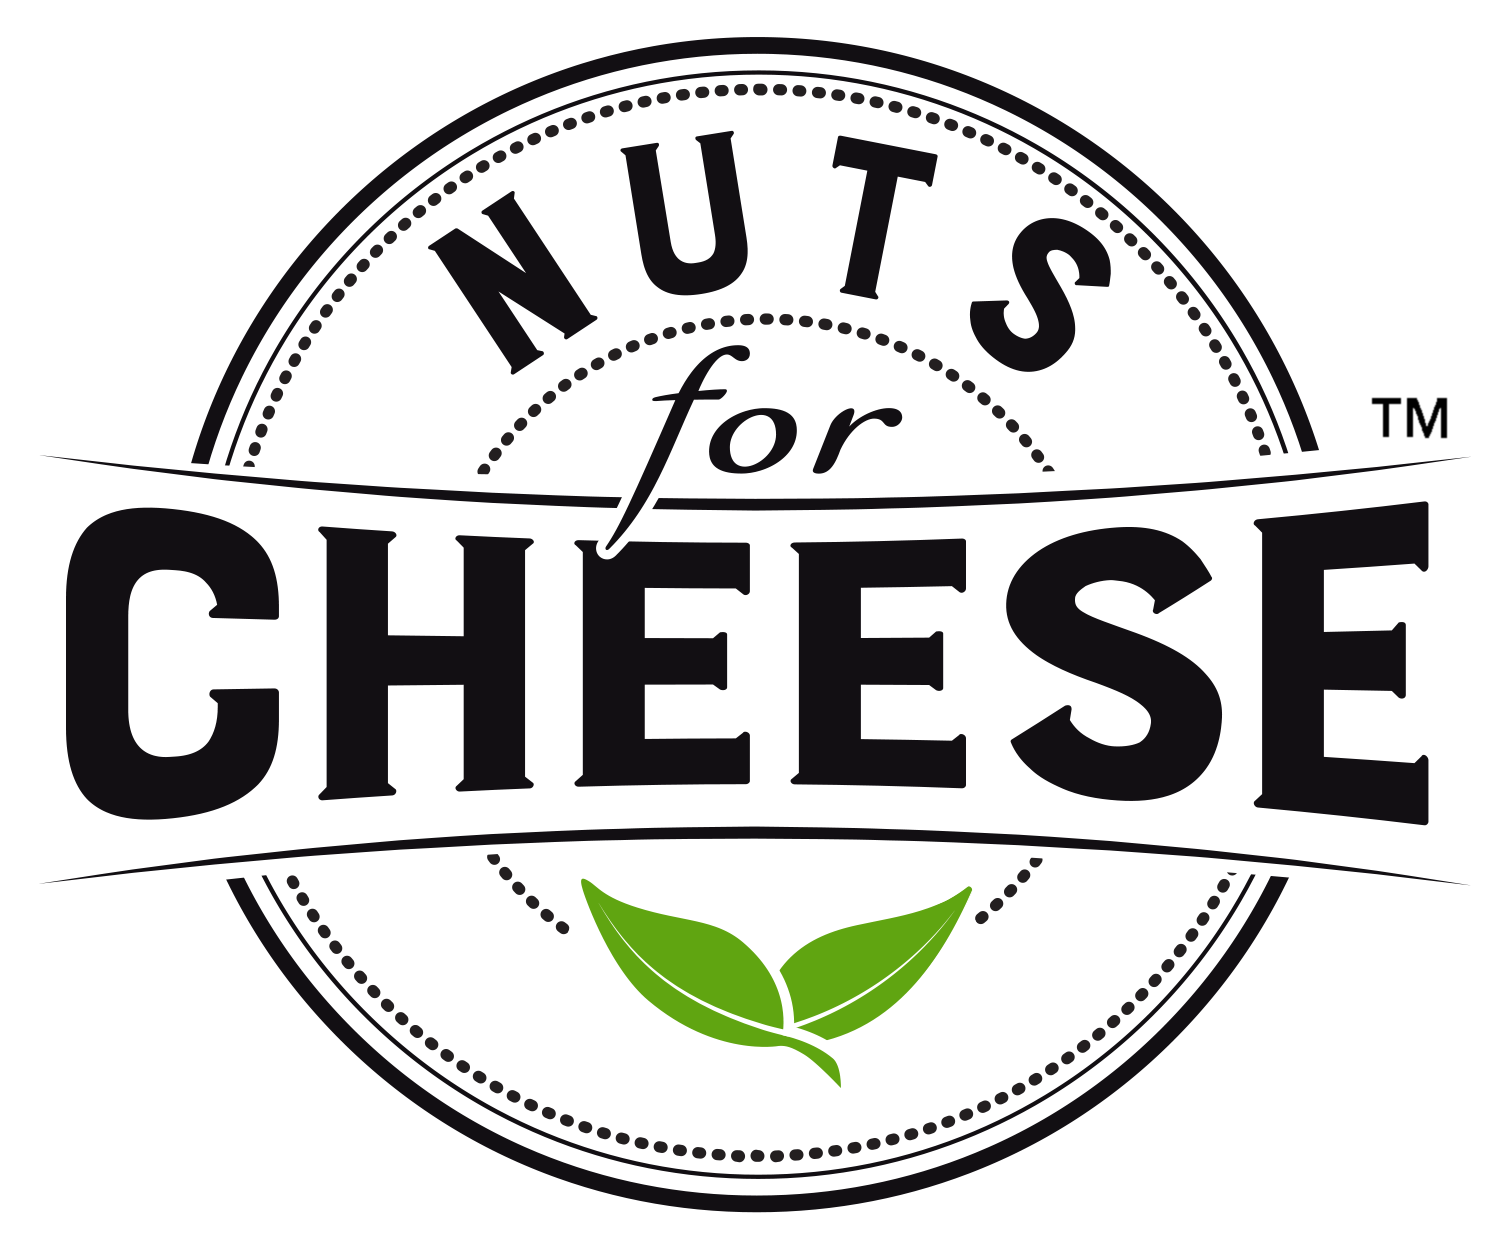 'Better for you' alternatives - Nuts For Cheese